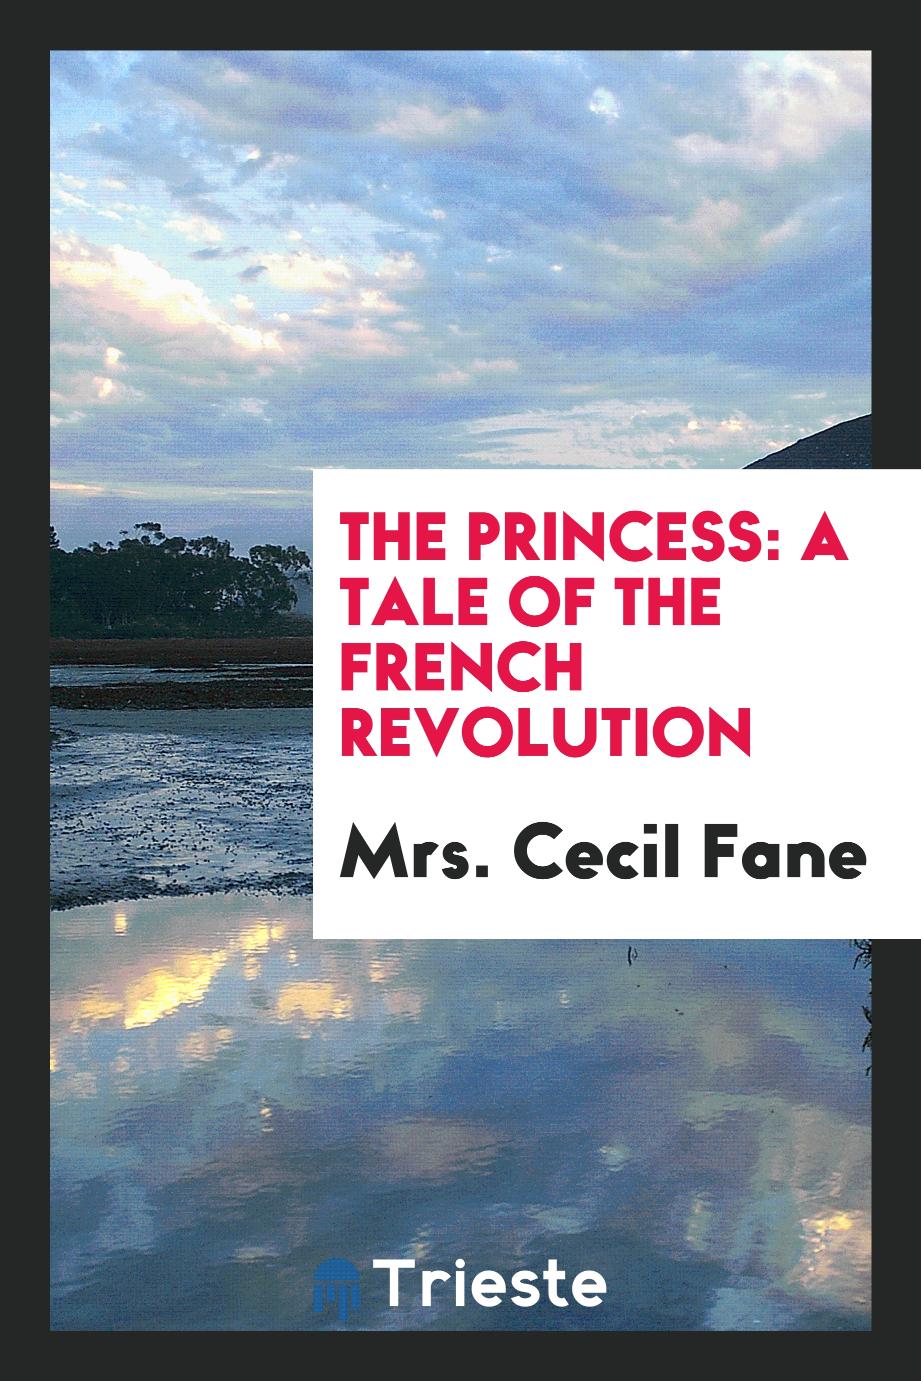 The Princess: A Tale of the French Revolution